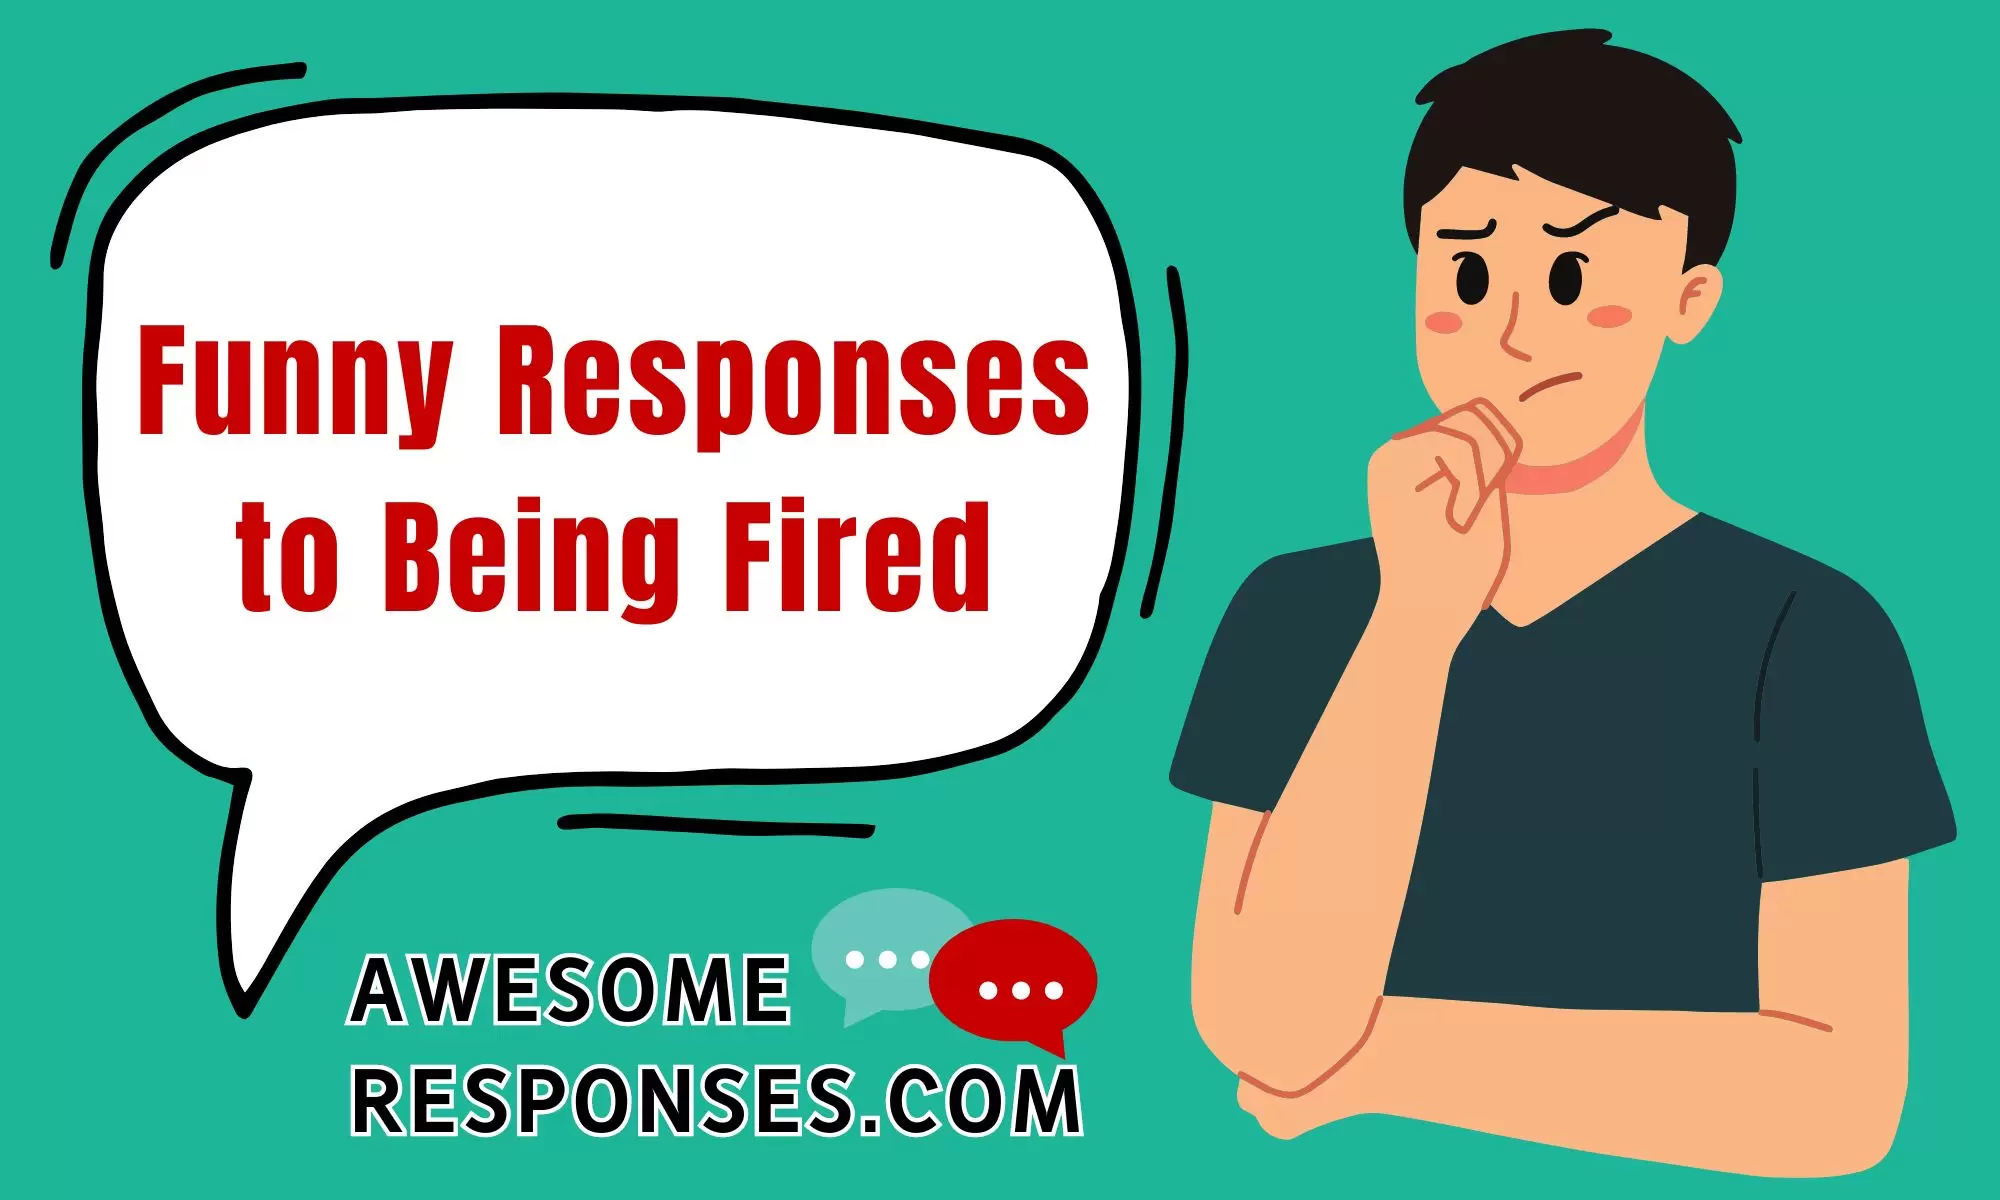 Funny Responses to Being Fired